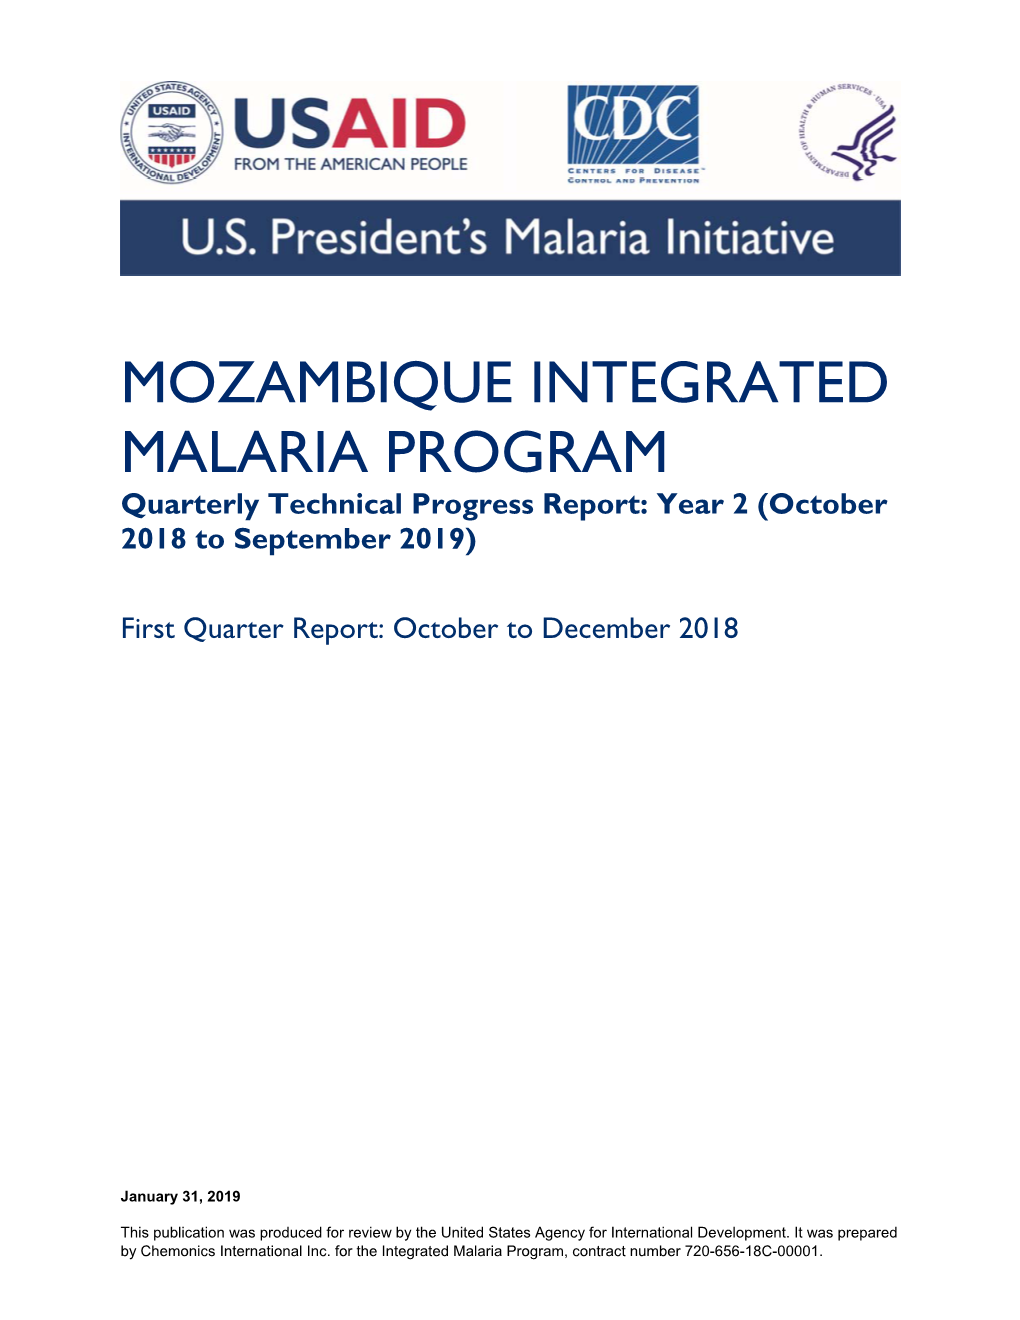 MOZAMBIQUE INTEGRATED MALARIA PROGRAM Quarterly Technical Progress Report: Year 2 (October 2018 to September 2019)